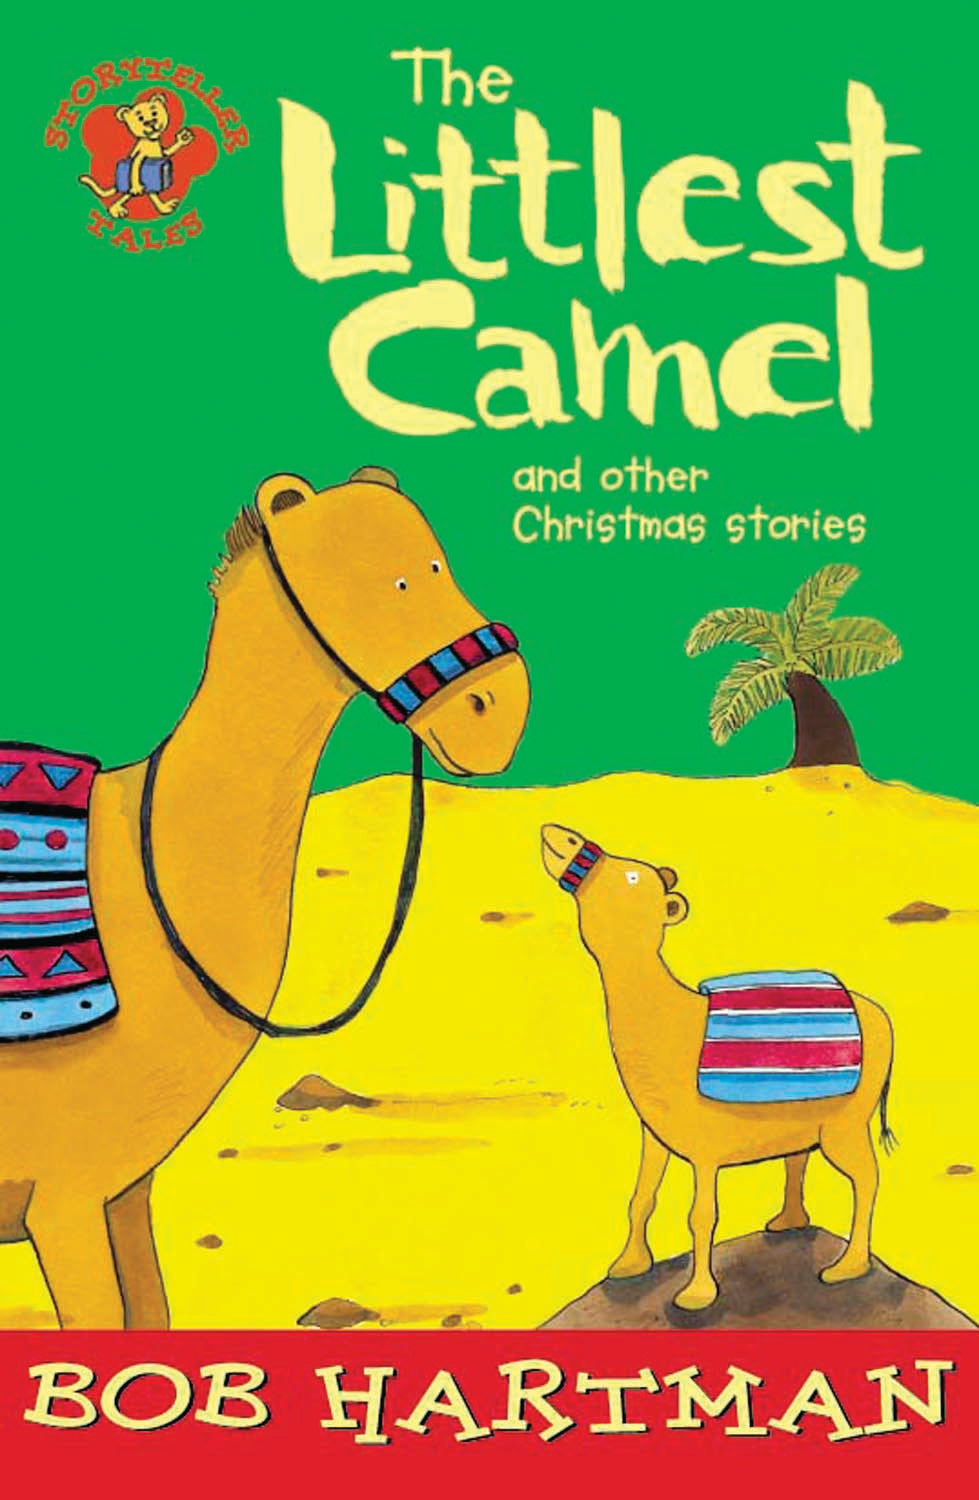 Image of The Littlest Camel other